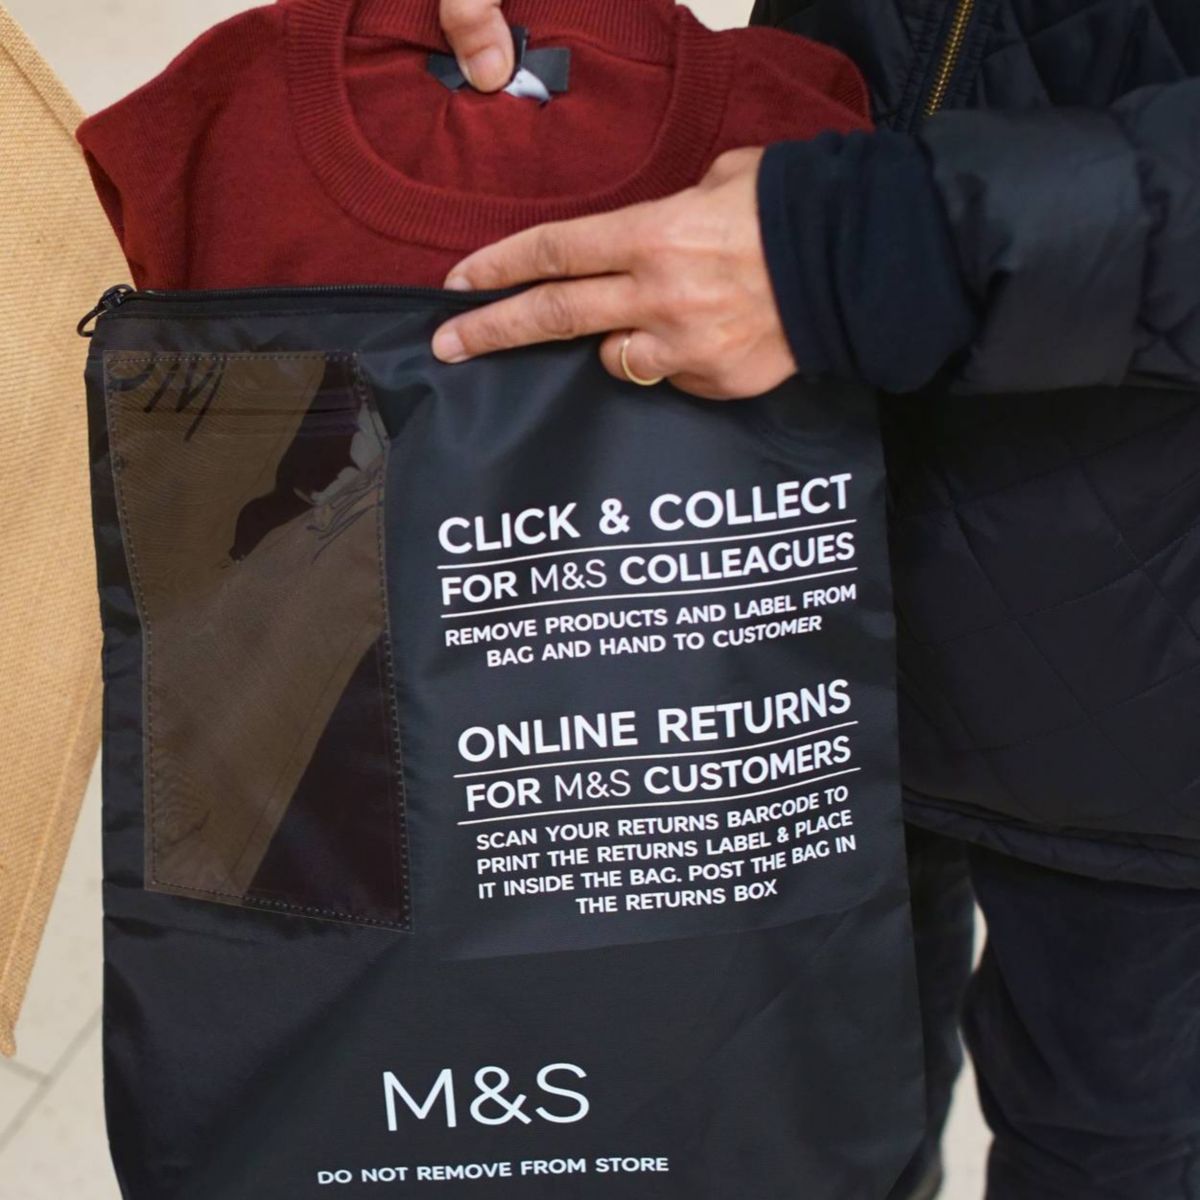 M&S rolls out 'Bring Your Own Bag' initiative for click-and-collect